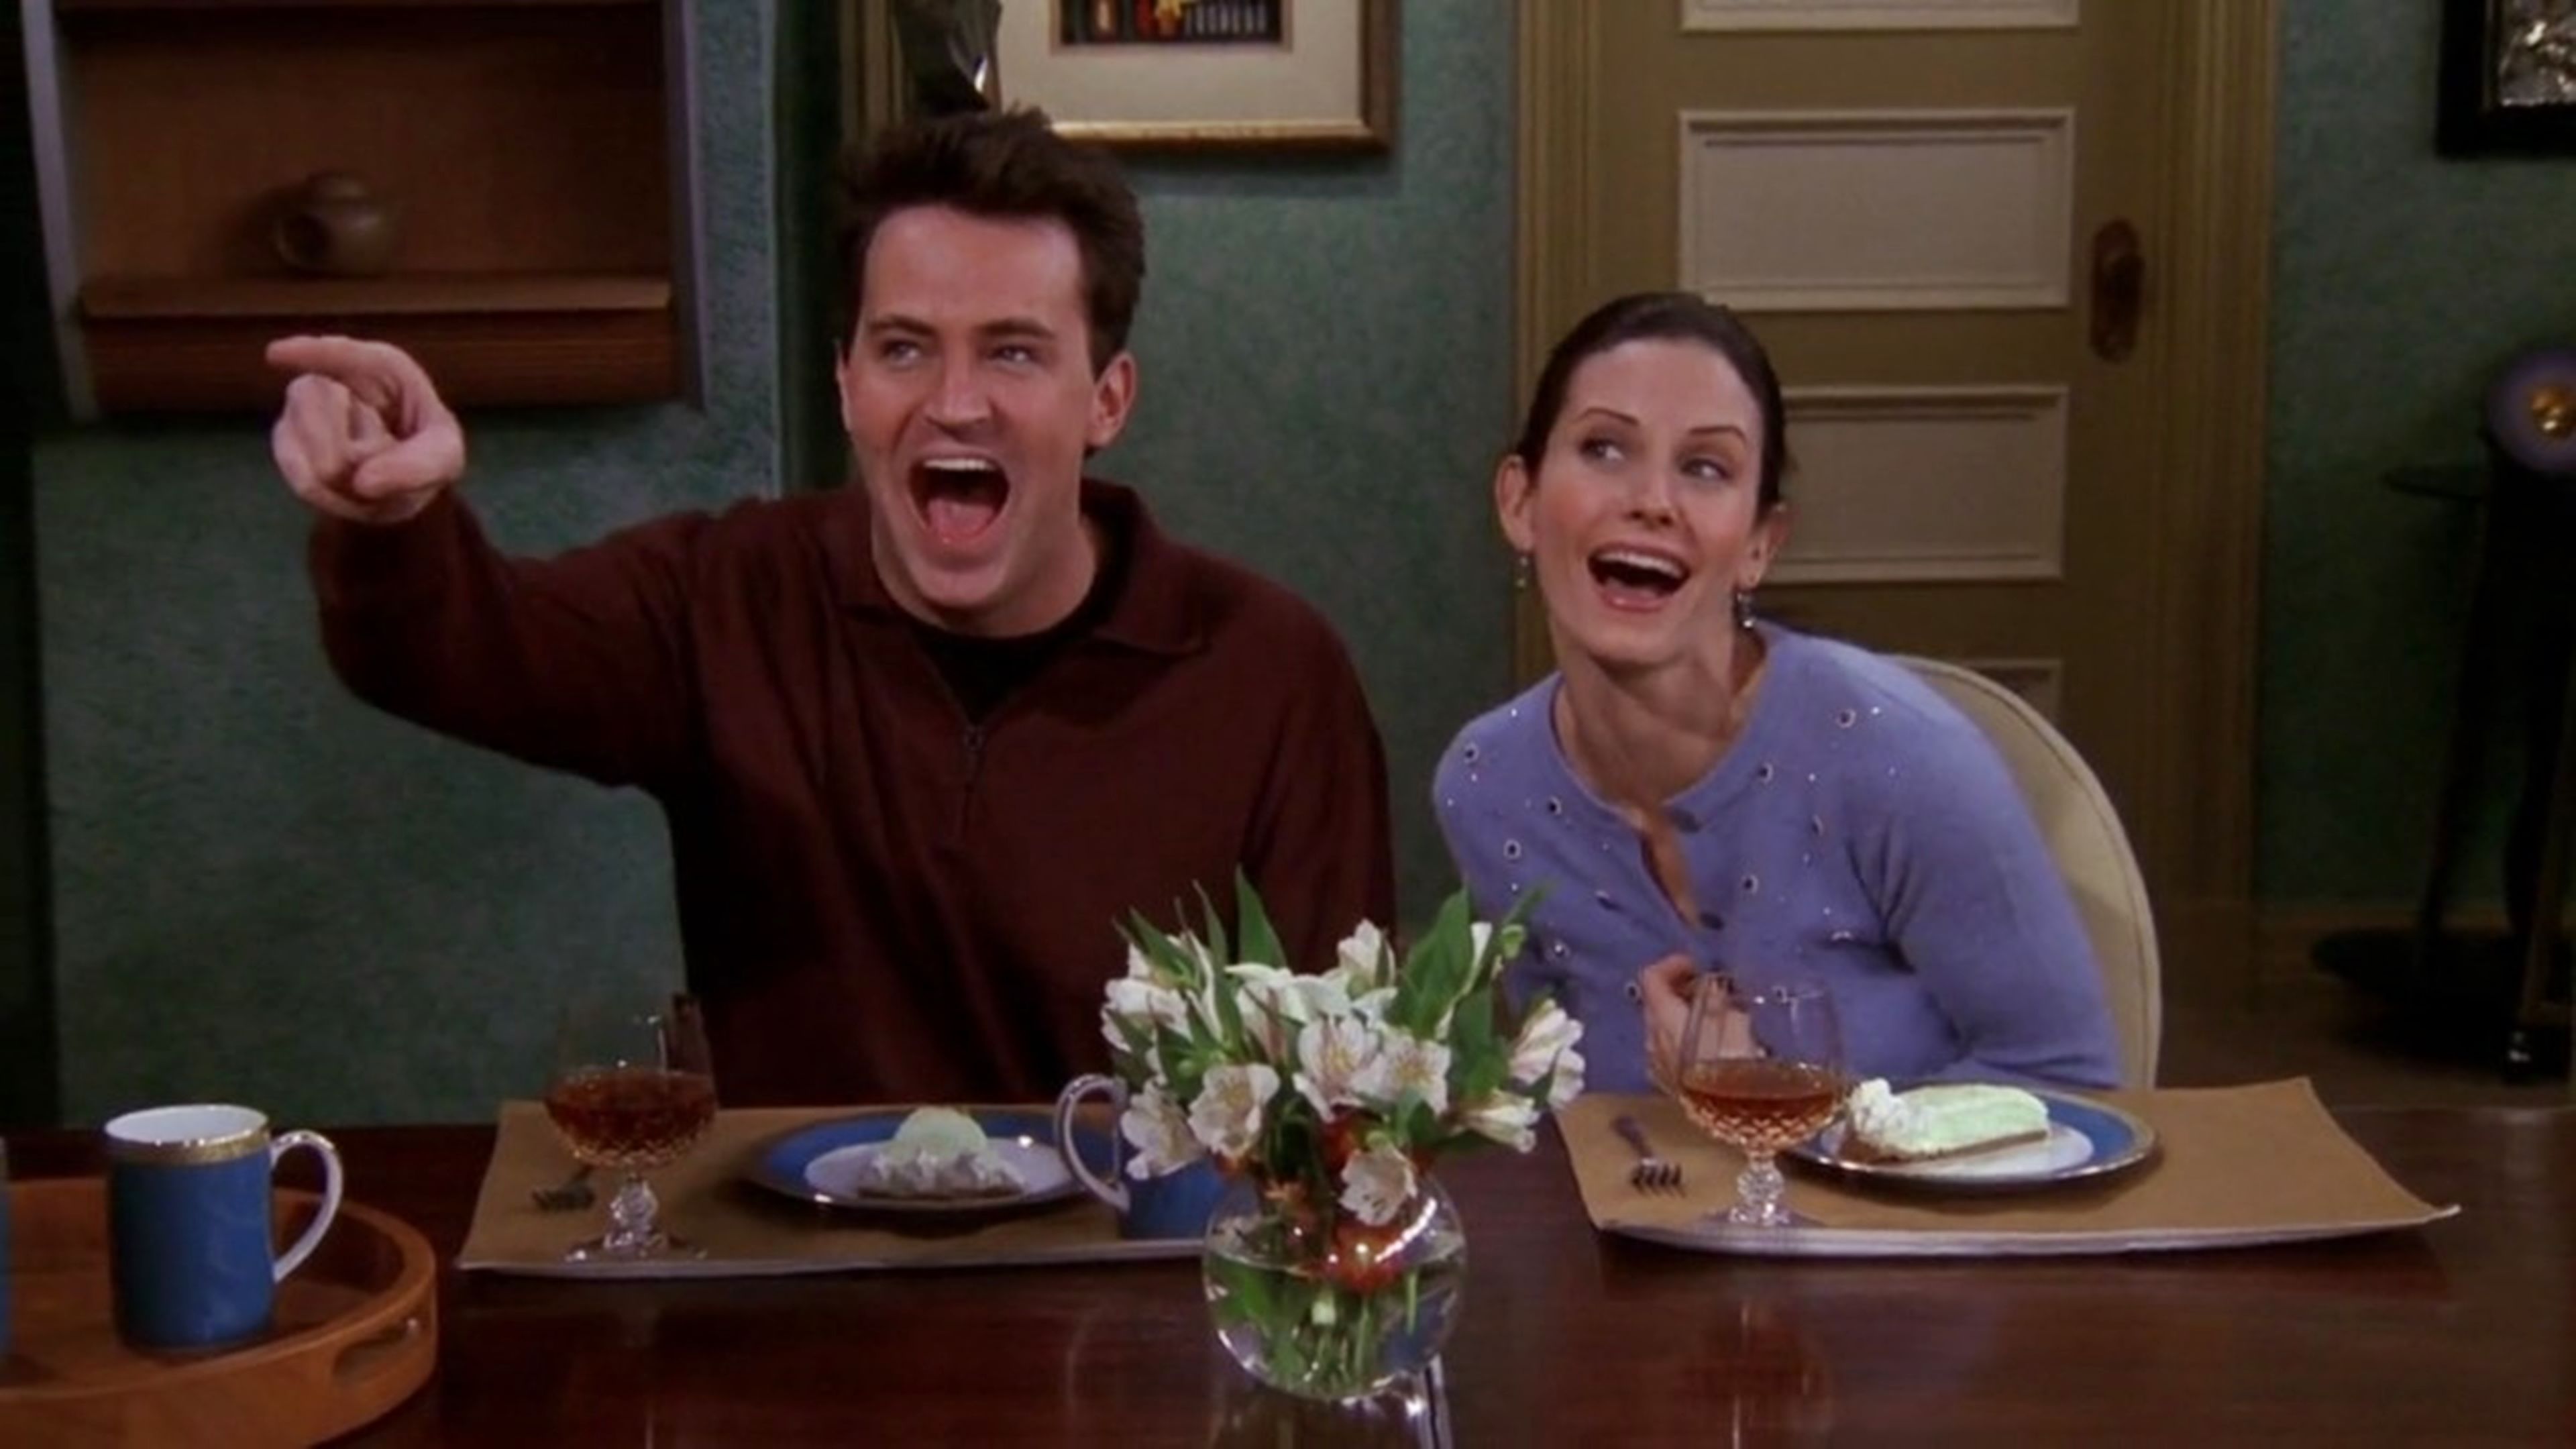 Friends - Chandler and Monica are laughing